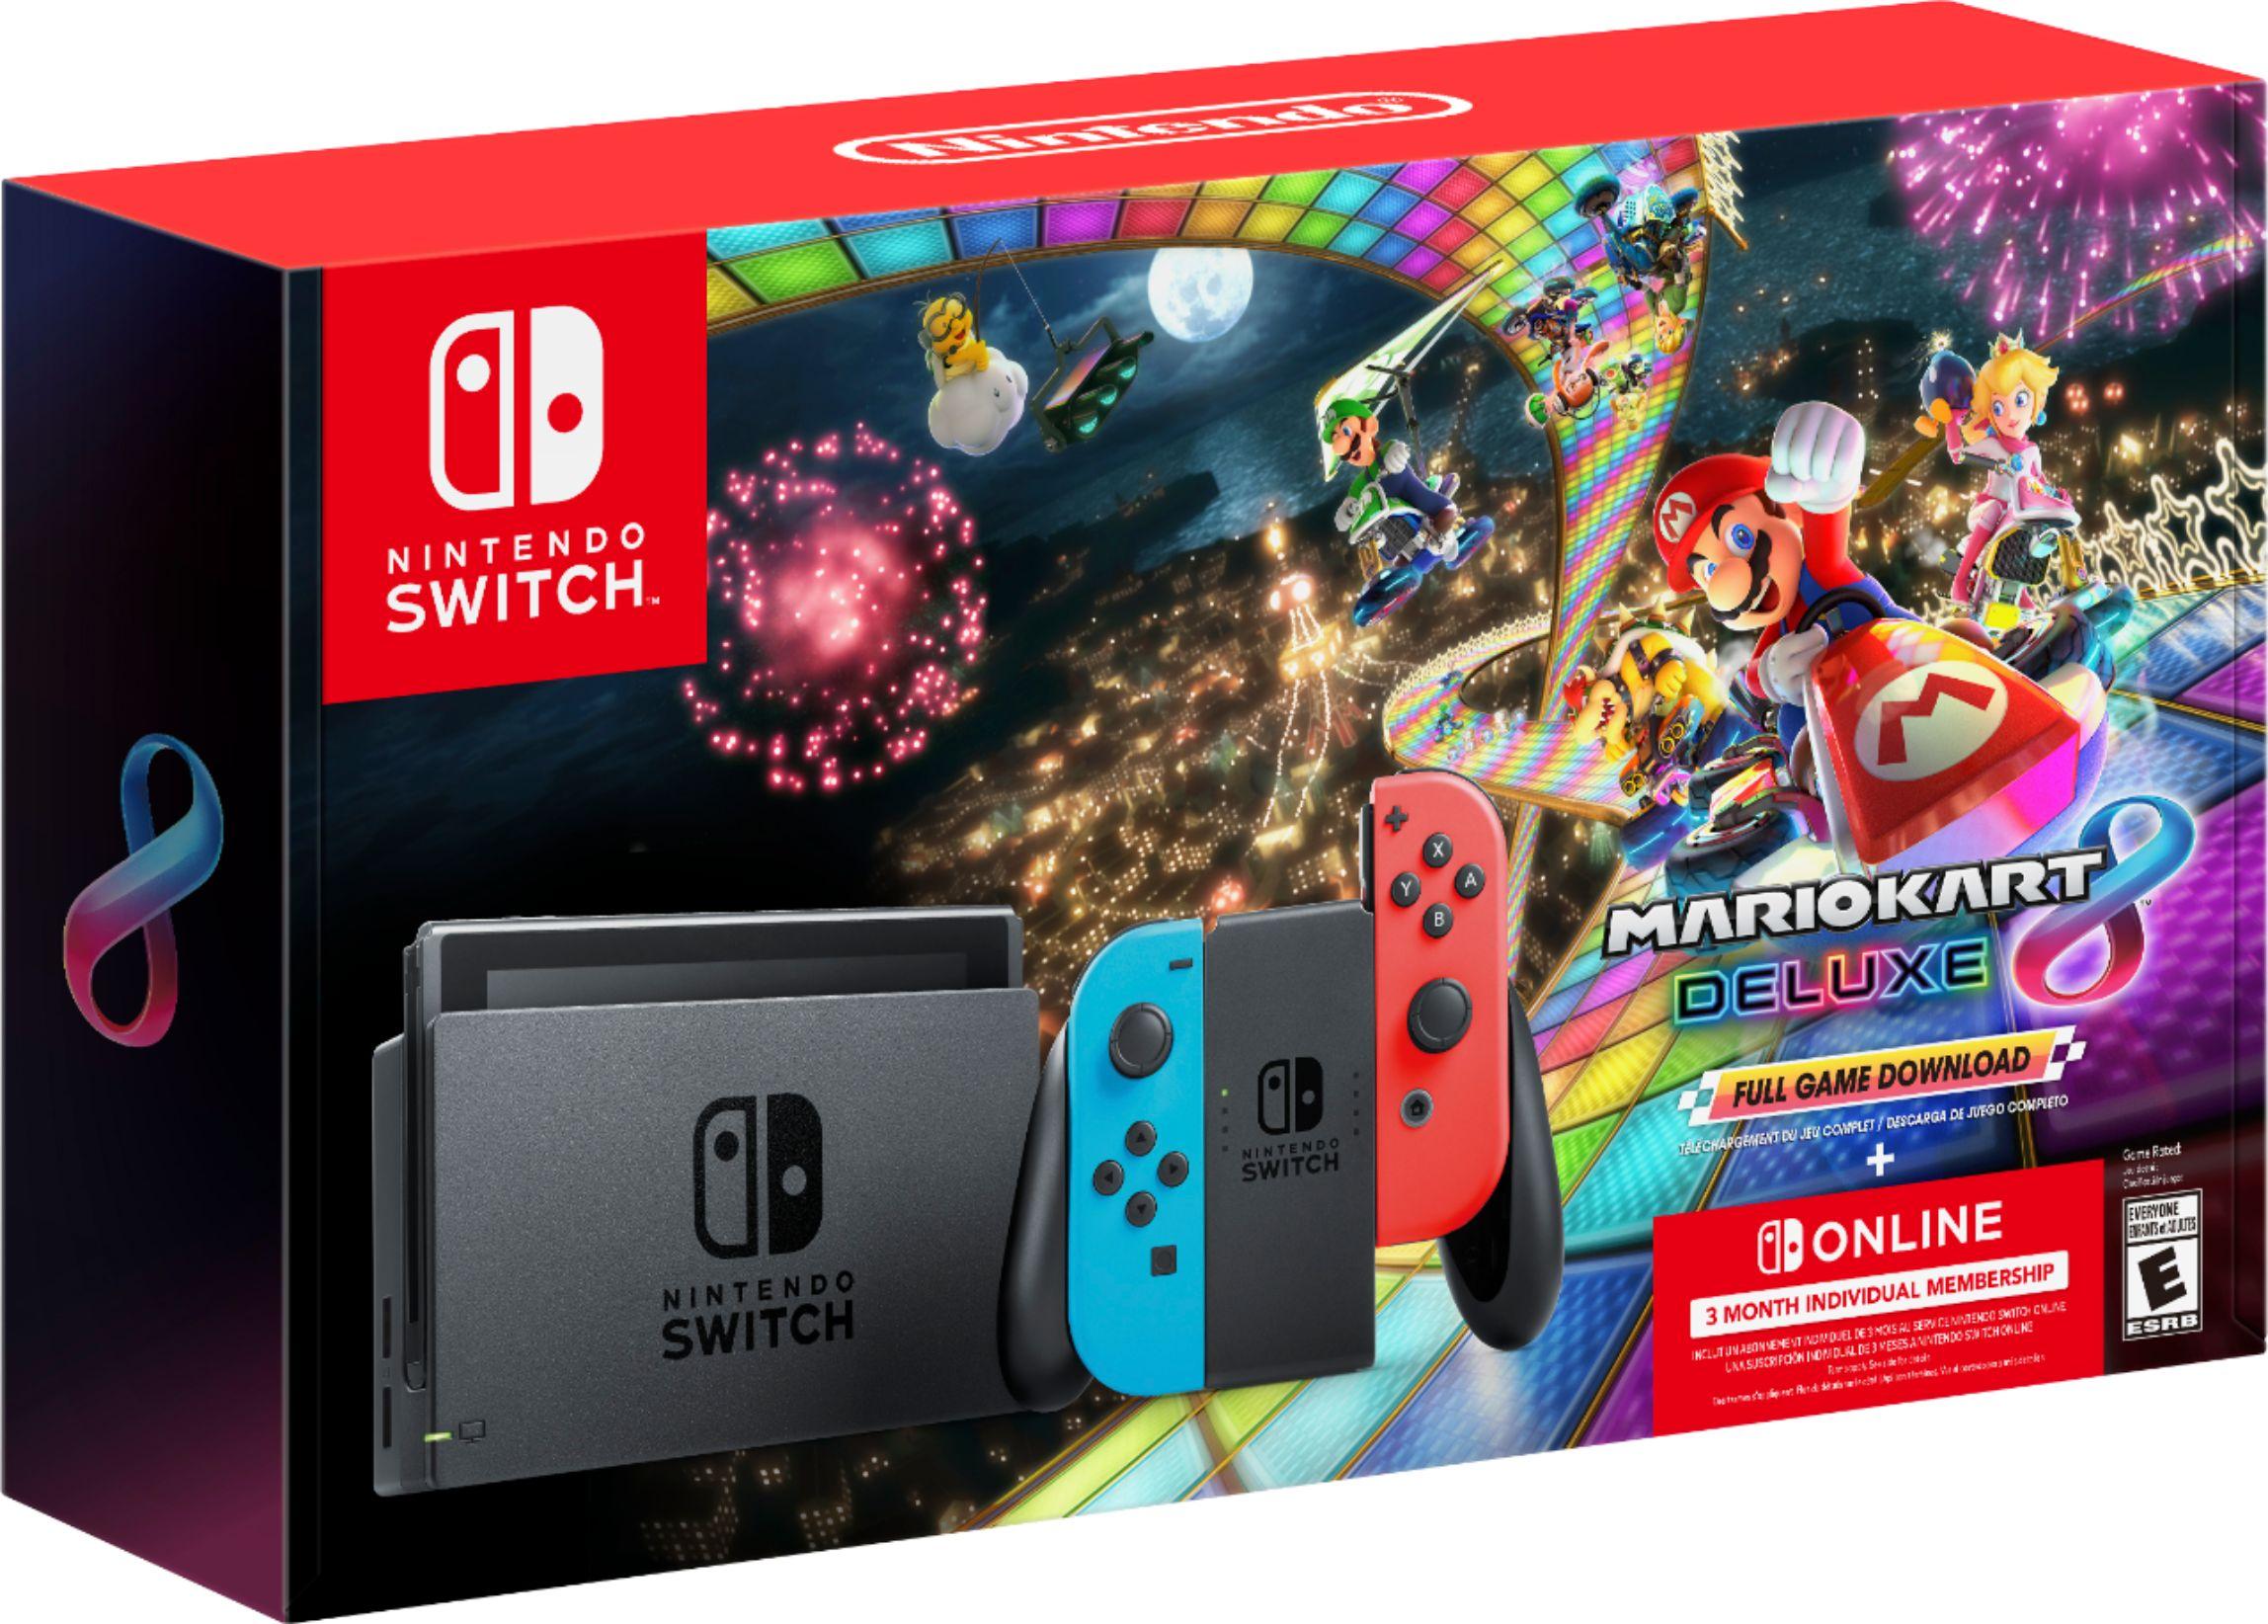 Nintendo Switch System + Mario Kart 8 + 3 Months Nintendo Online for $299.99 Shipped